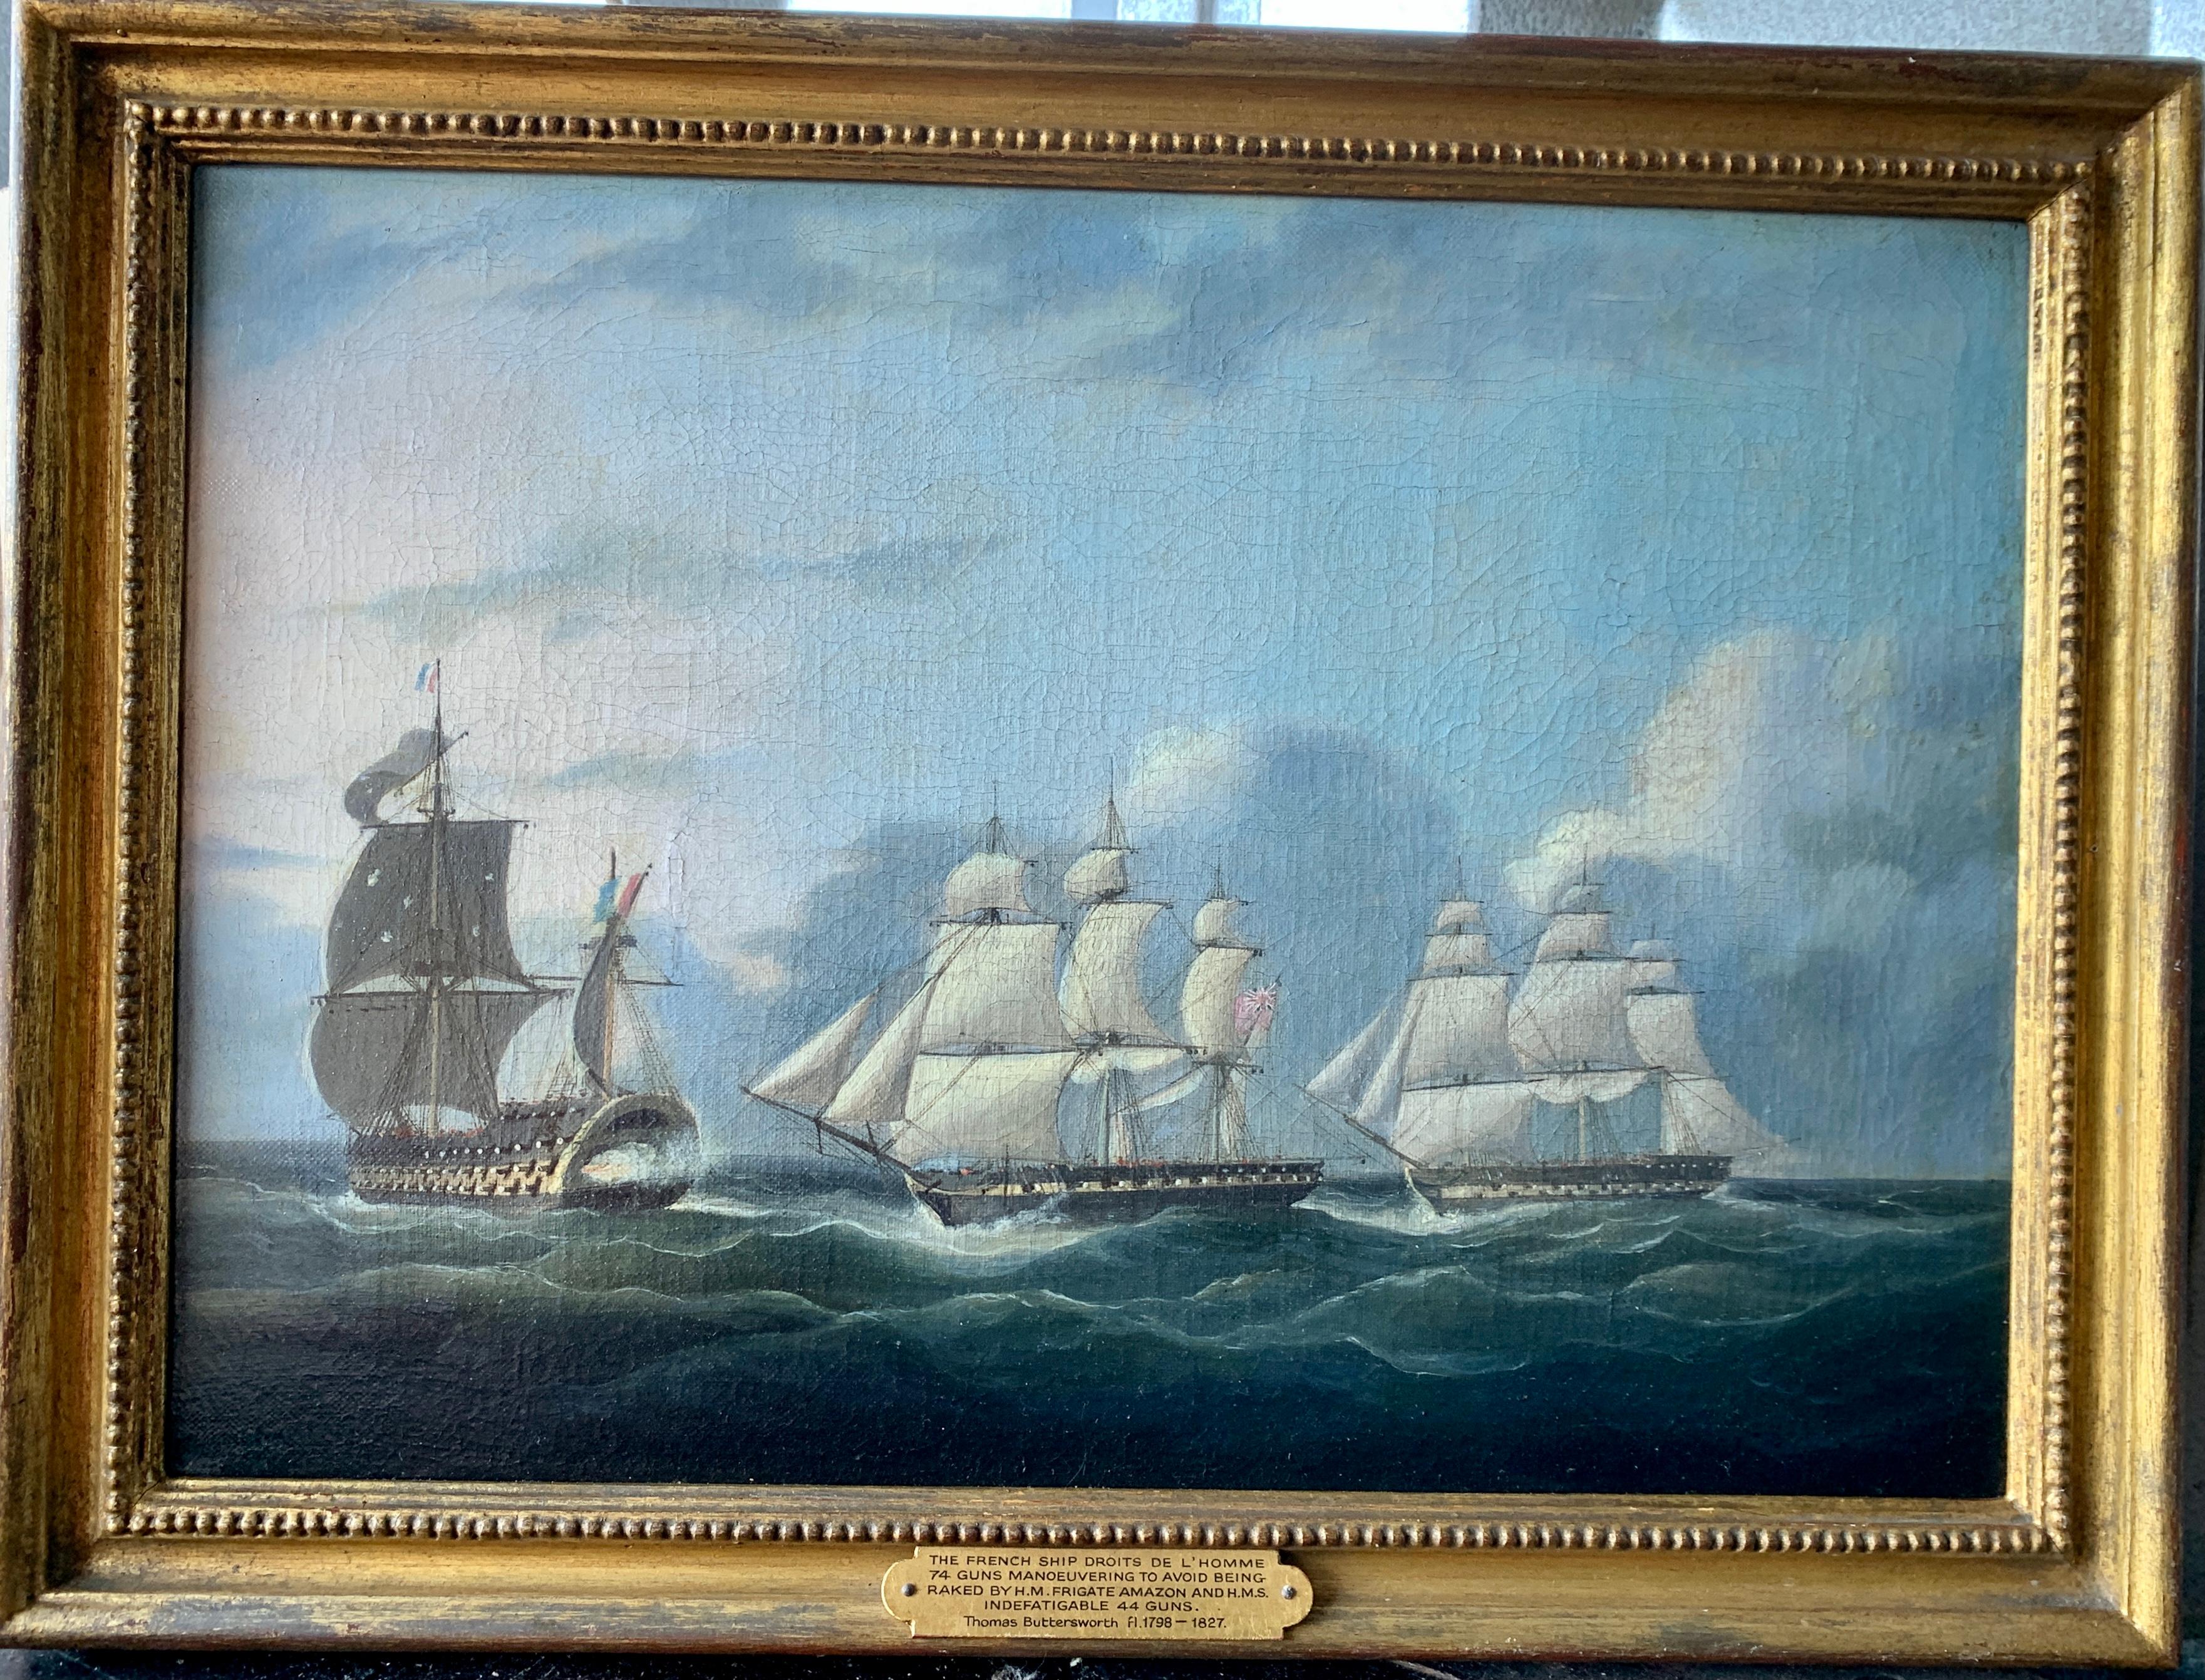 Marine battle, French ship of the line and two British frigates off of Brittany  - Painting by Thomas Buttersworth